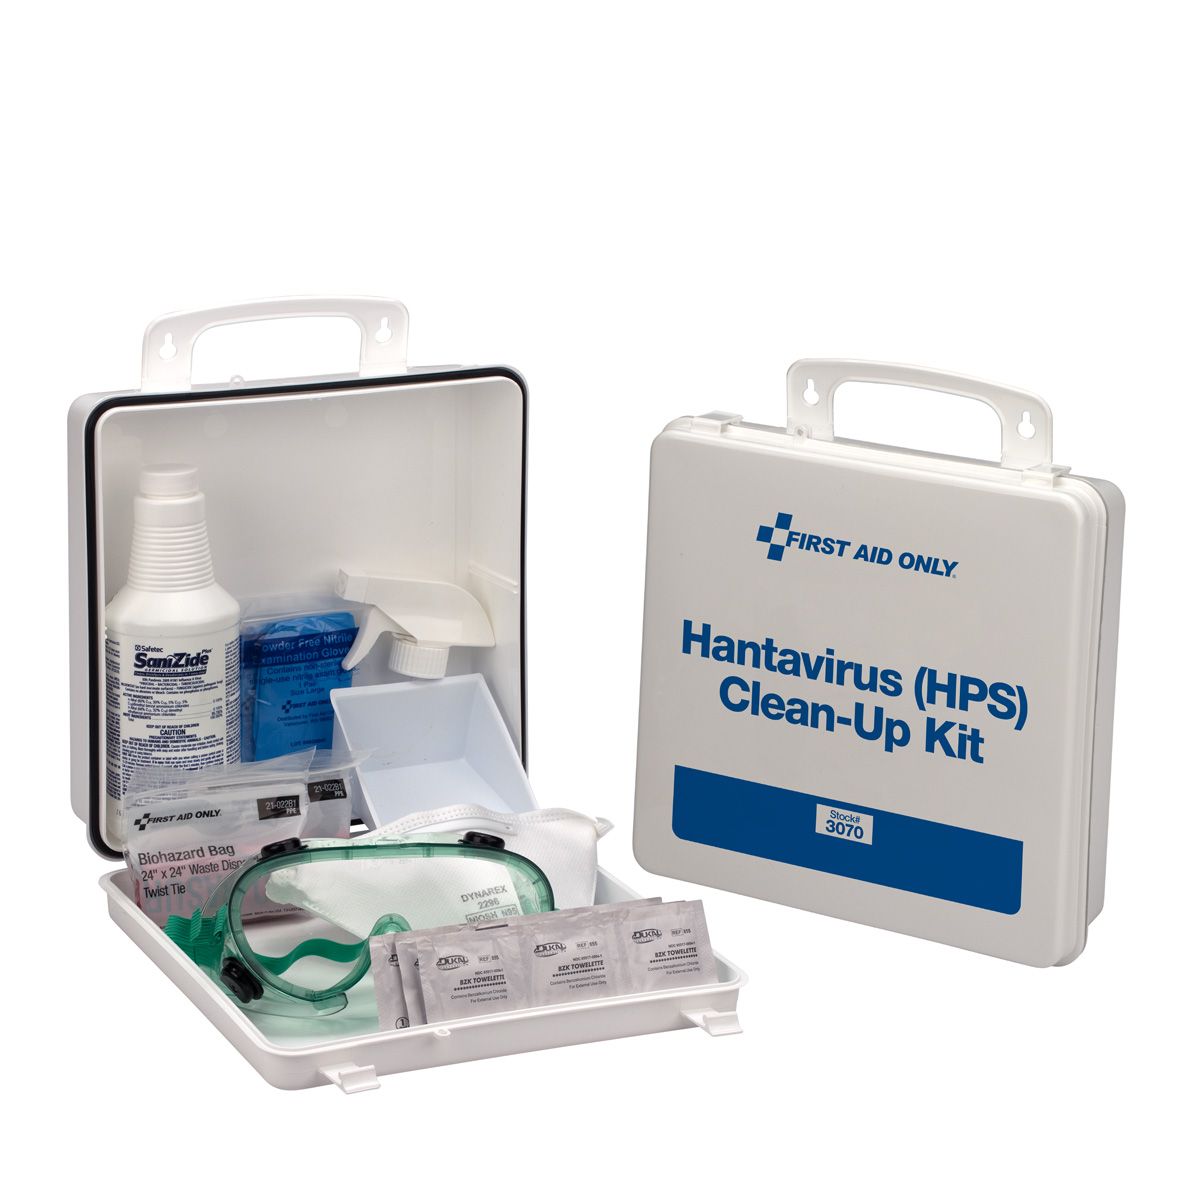 First Aid Only HPS Hanta Virus Clean Up Kit 3070